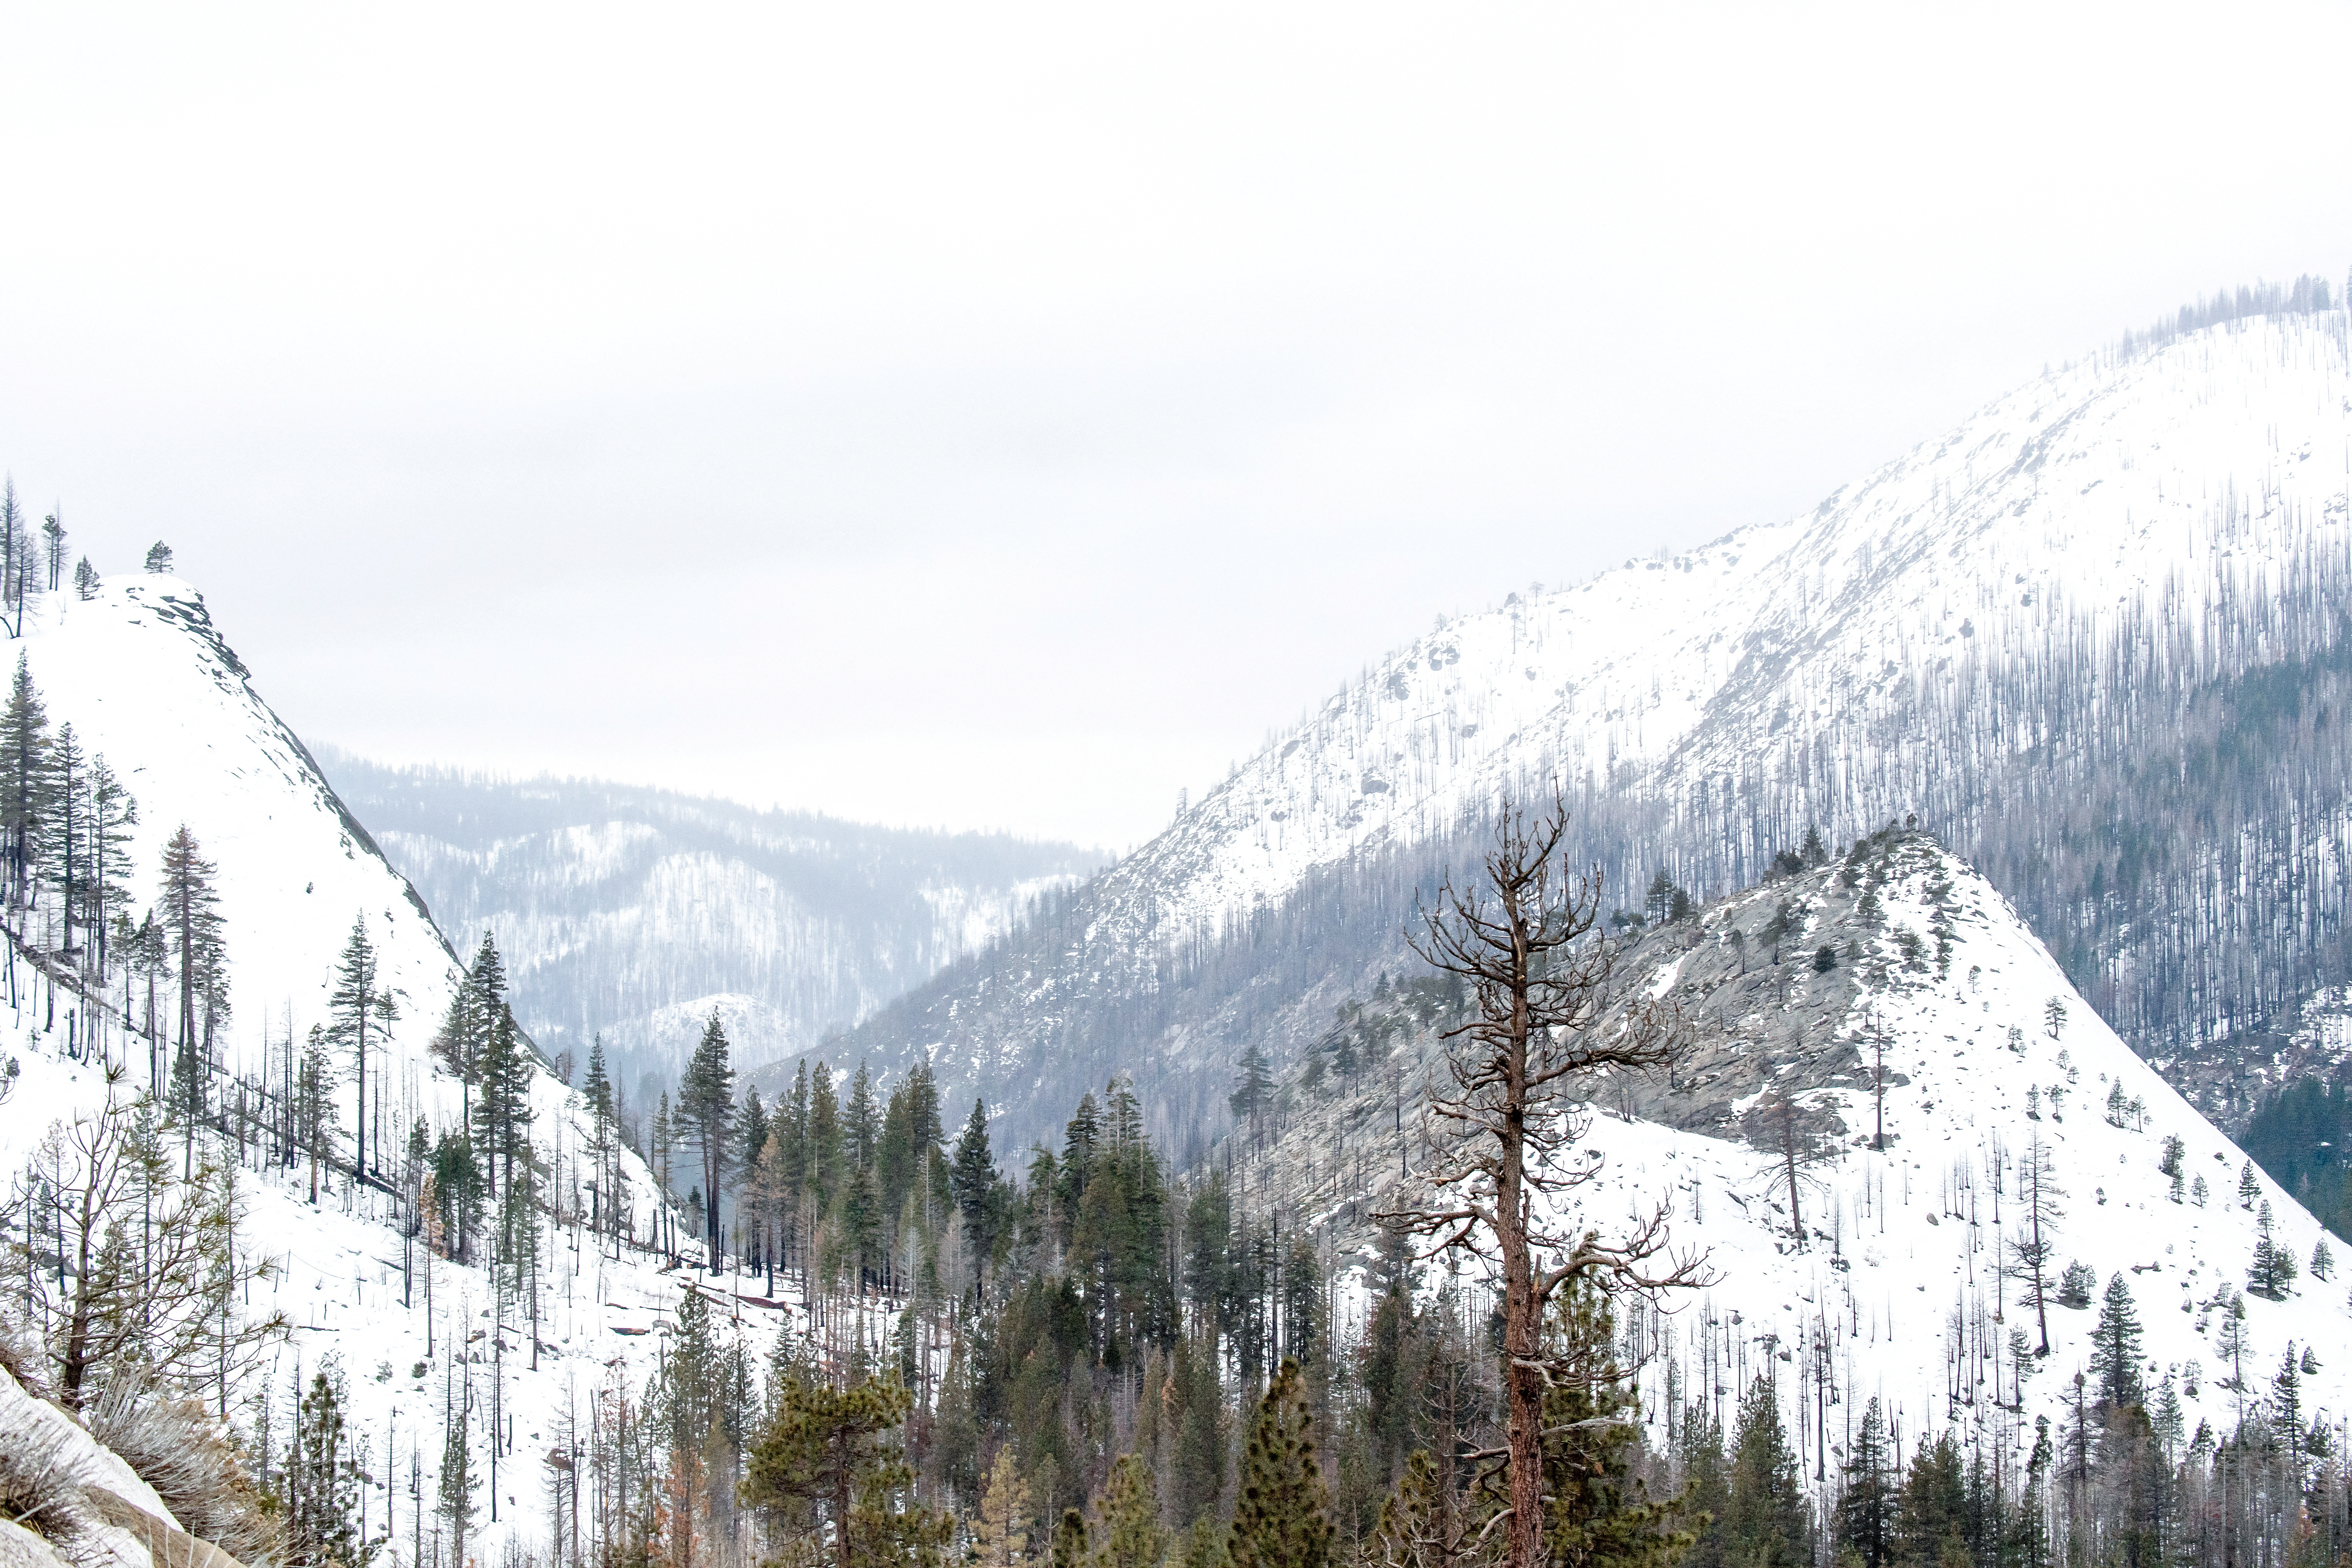 California's Sierra Nevada mountains could see 12 feet of snow